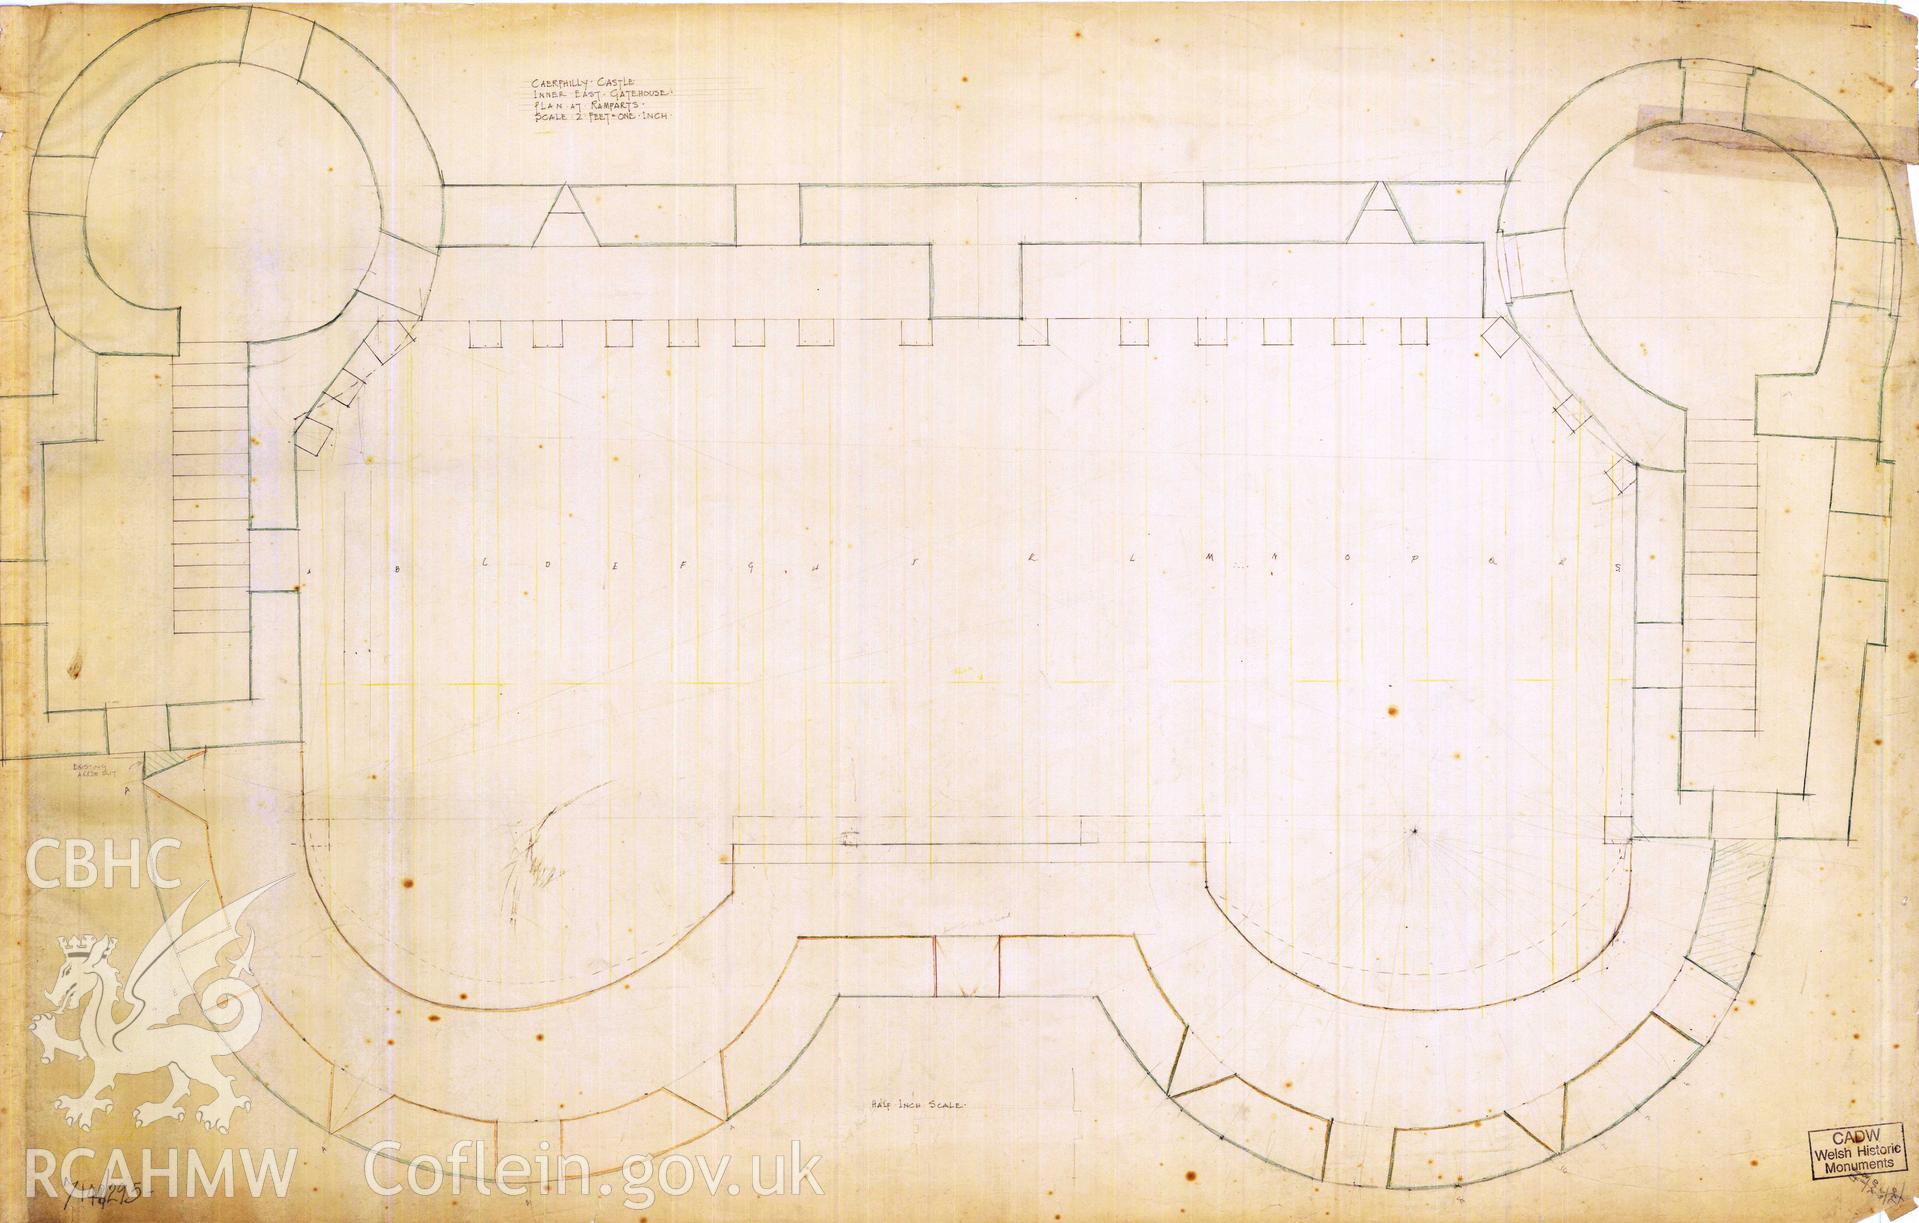 Cadw guardianship monument drawing of Caerphilly Castle. Inner E gate, parapet plan. Cadw Ref. No:714B/295. Scale 1:24.